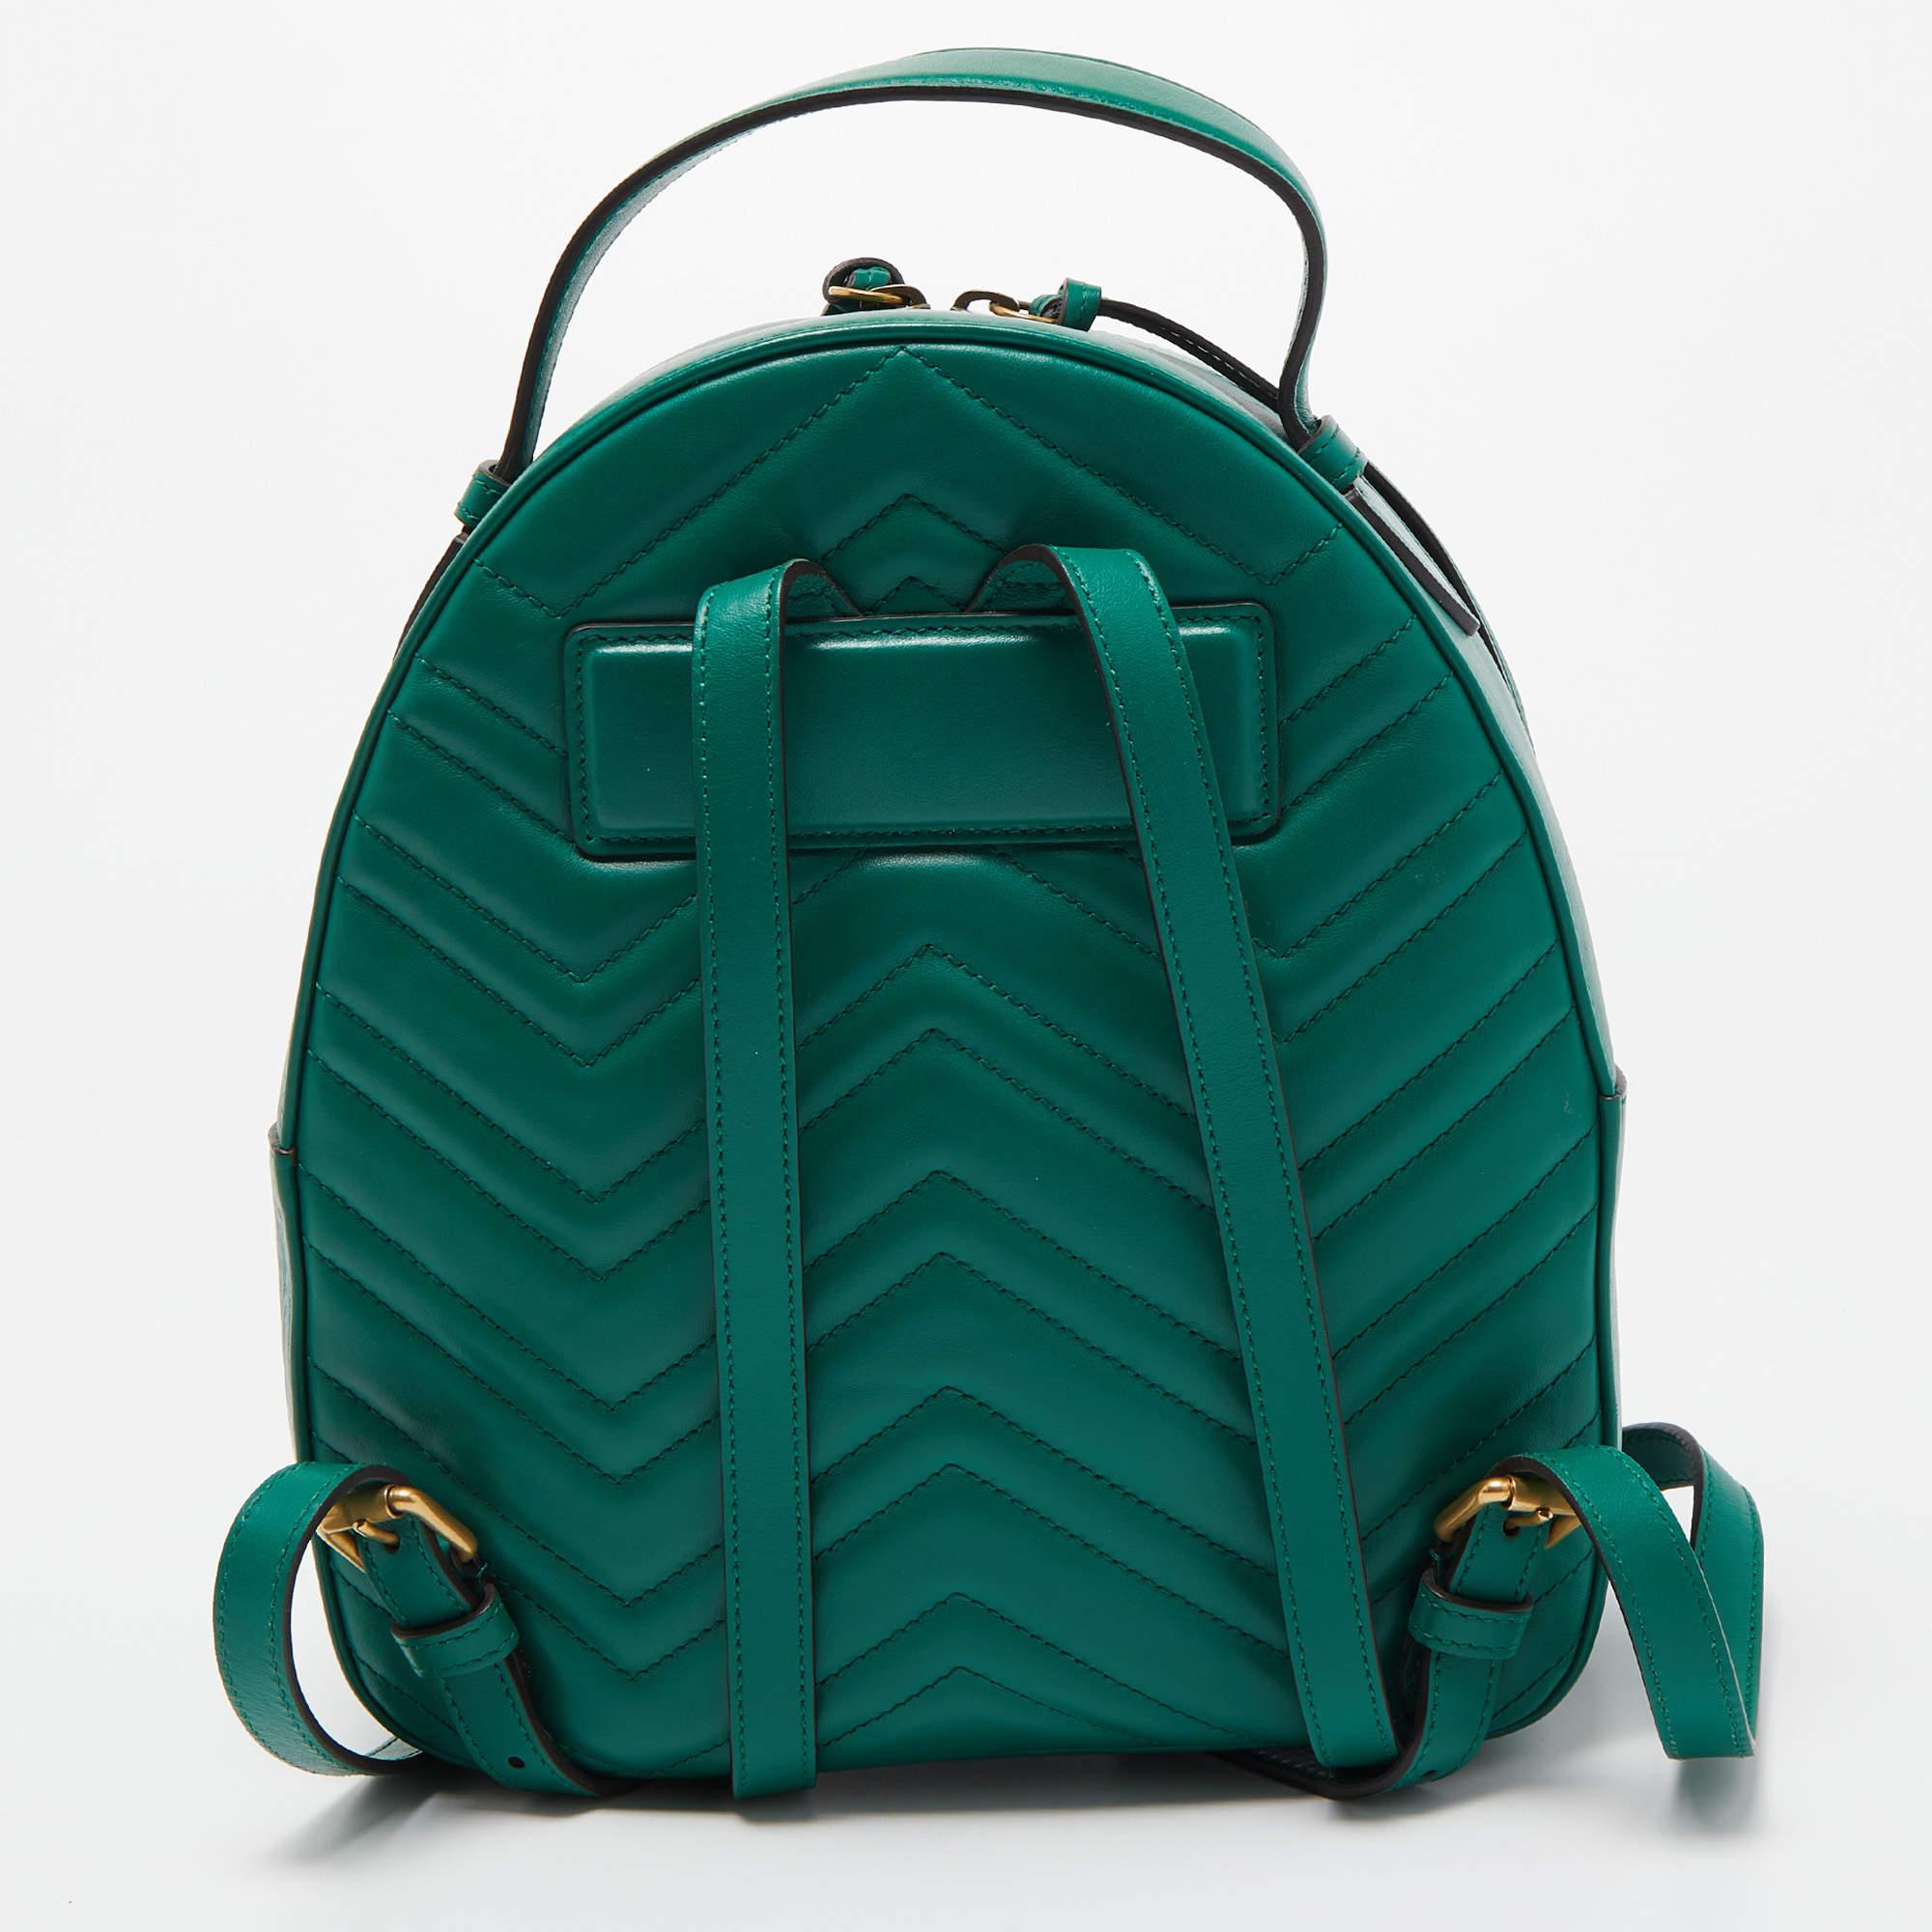 Gucci Green Matelassé Leather GG Marmont Backpack For Sale 9